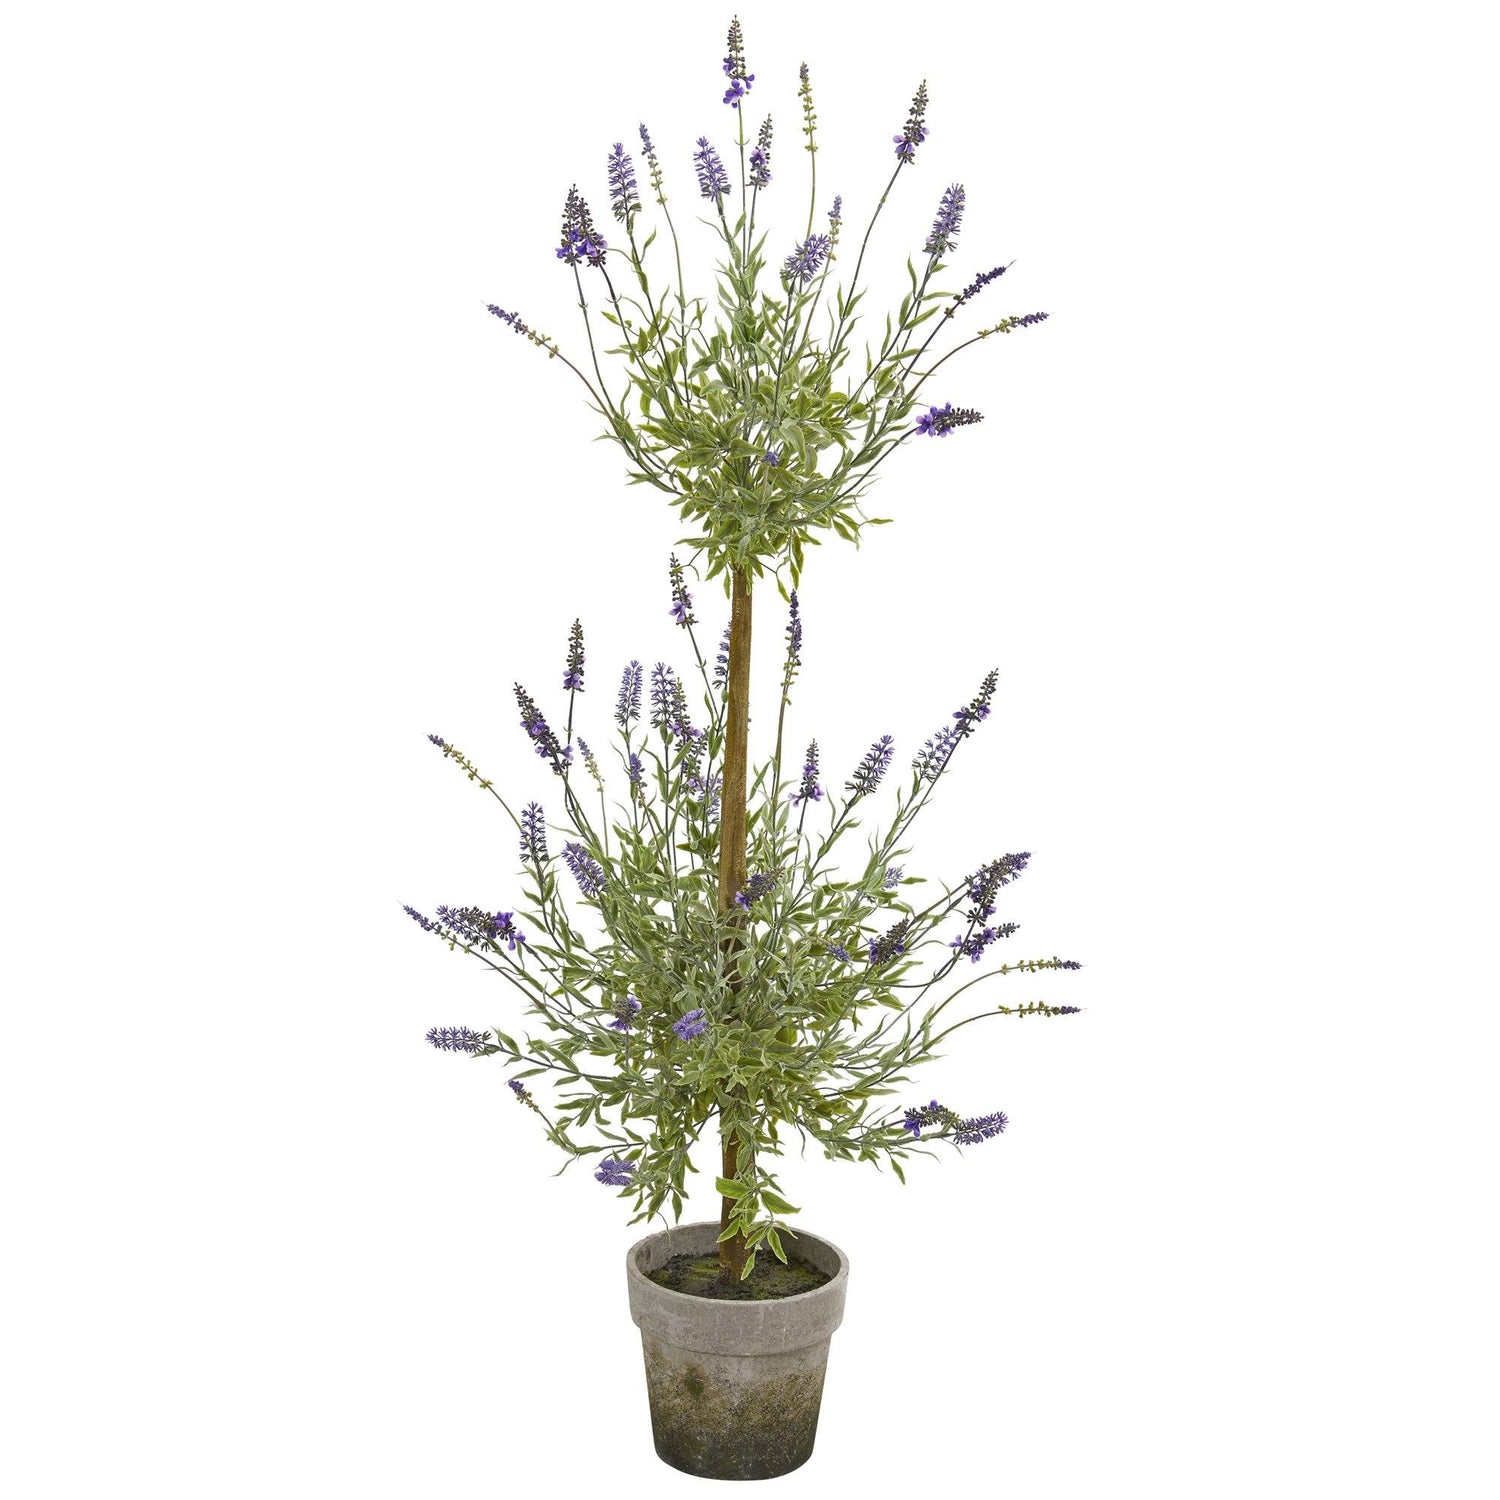 34” Lavender Topiary Artificial Tree